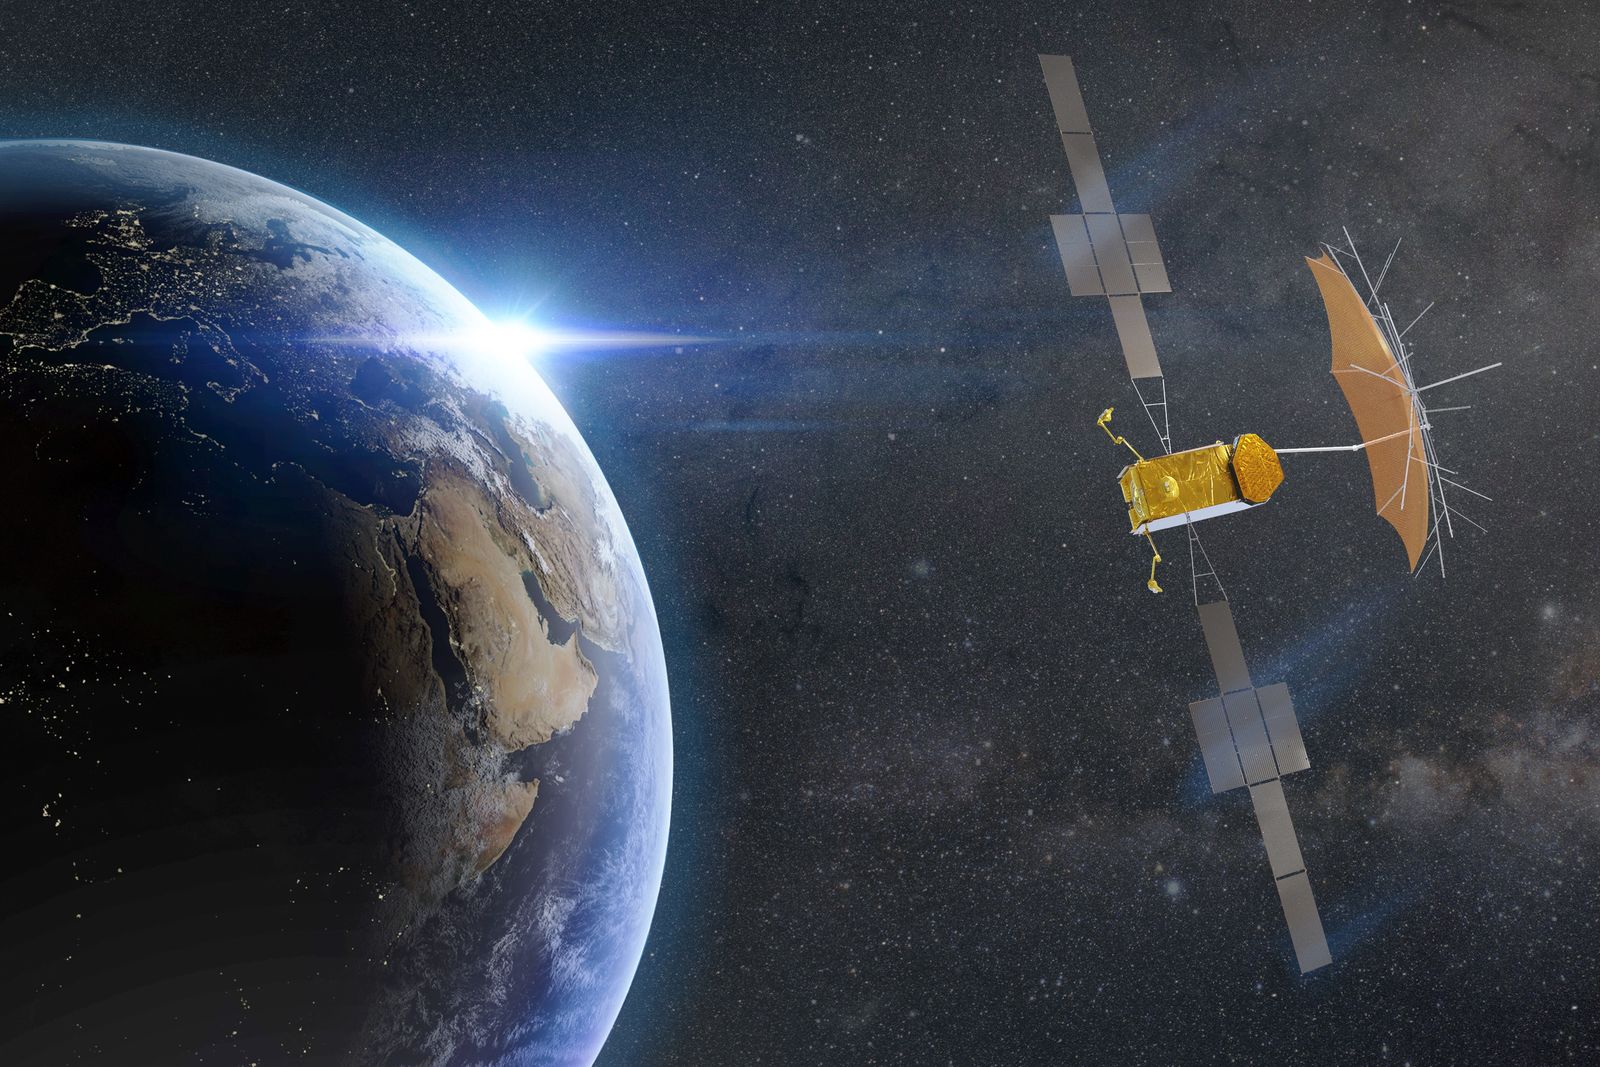 Airbus wants to transfer energy from space to Earth